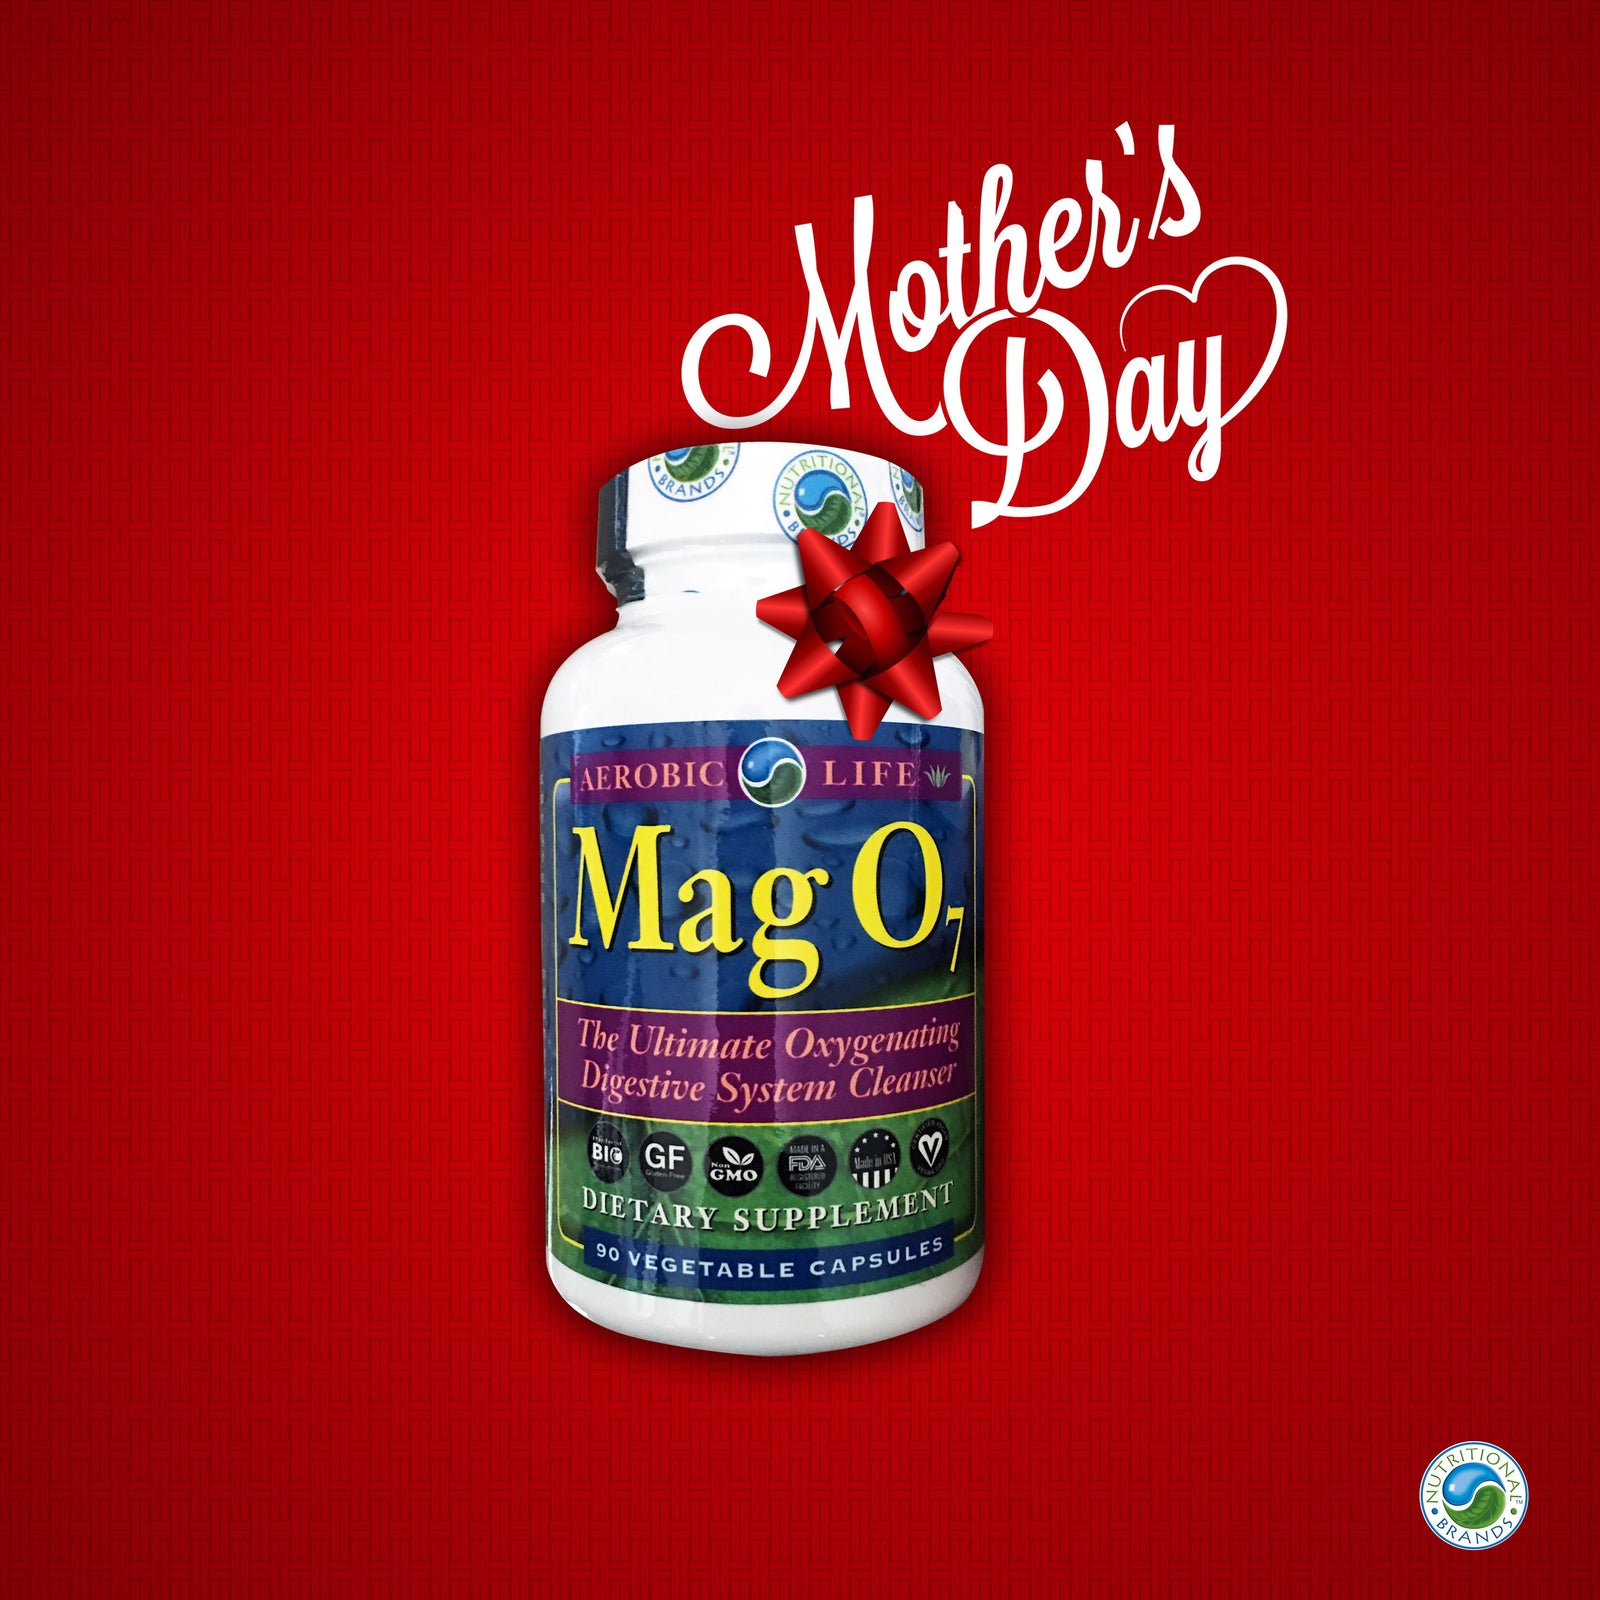 Mother's Day MagO7 Giveaway!